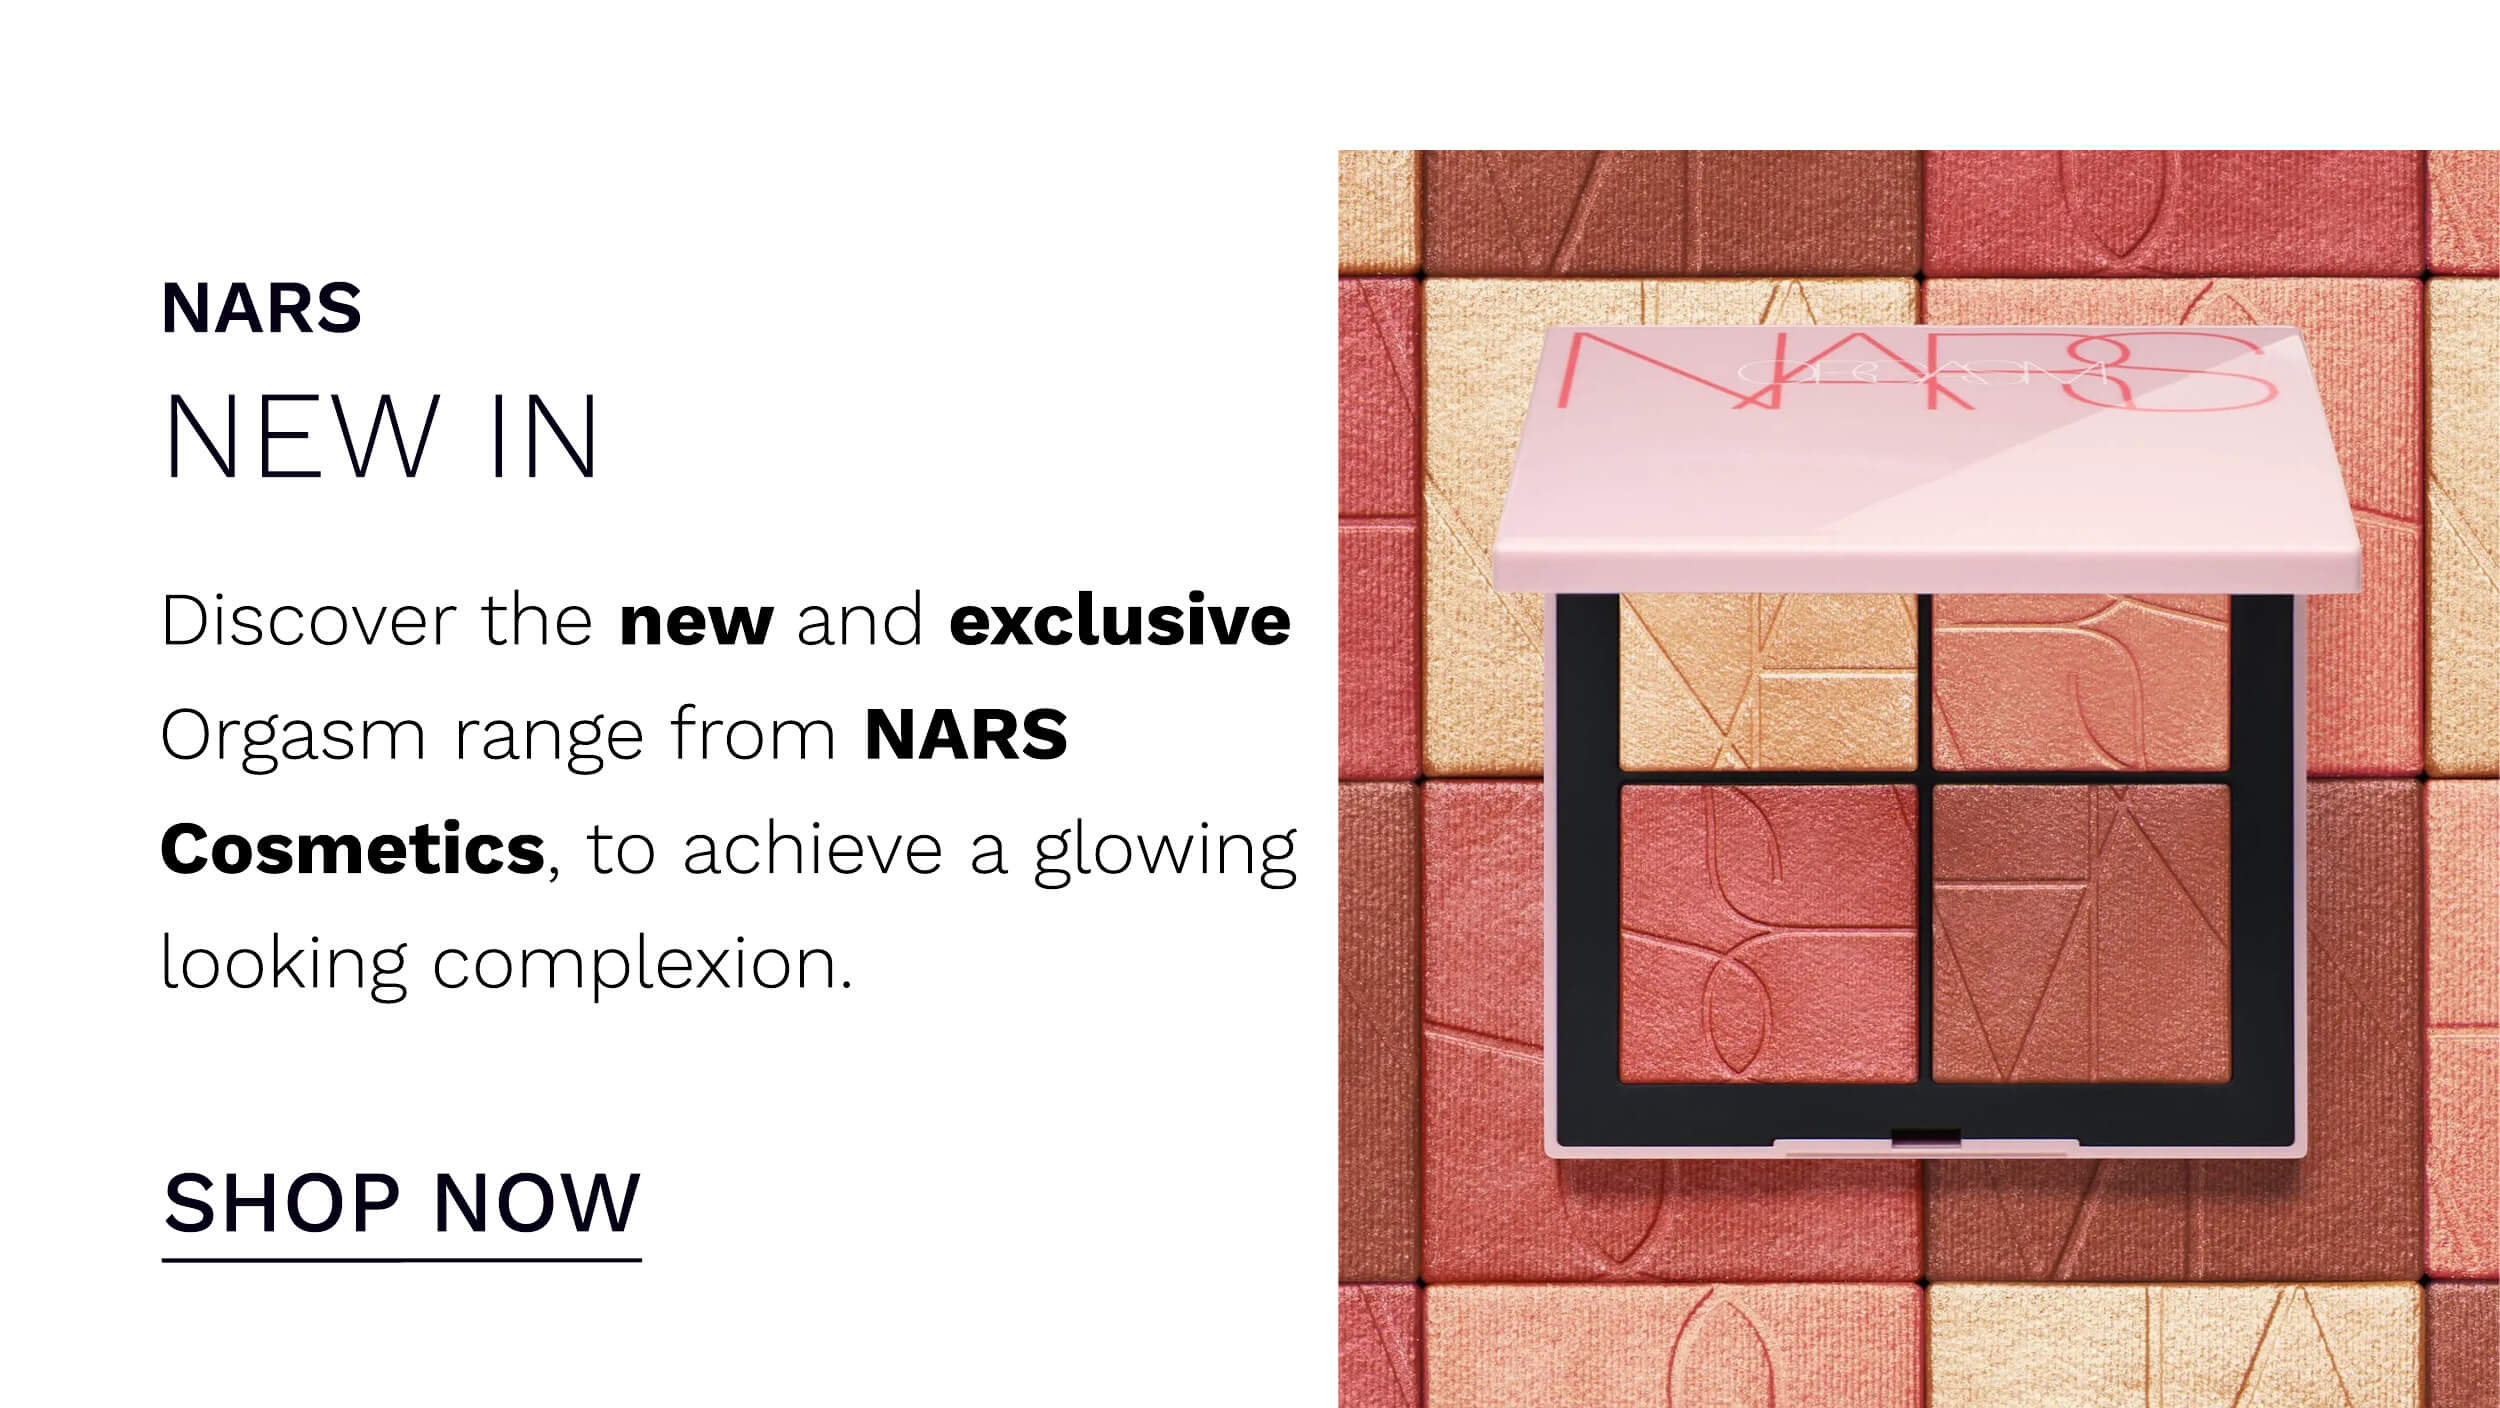 NARS NEW IN Discover the new and exclusive Orgasm range from NARS Cosmetics, to achieve a glowing looking complexion. SHOP NOW 